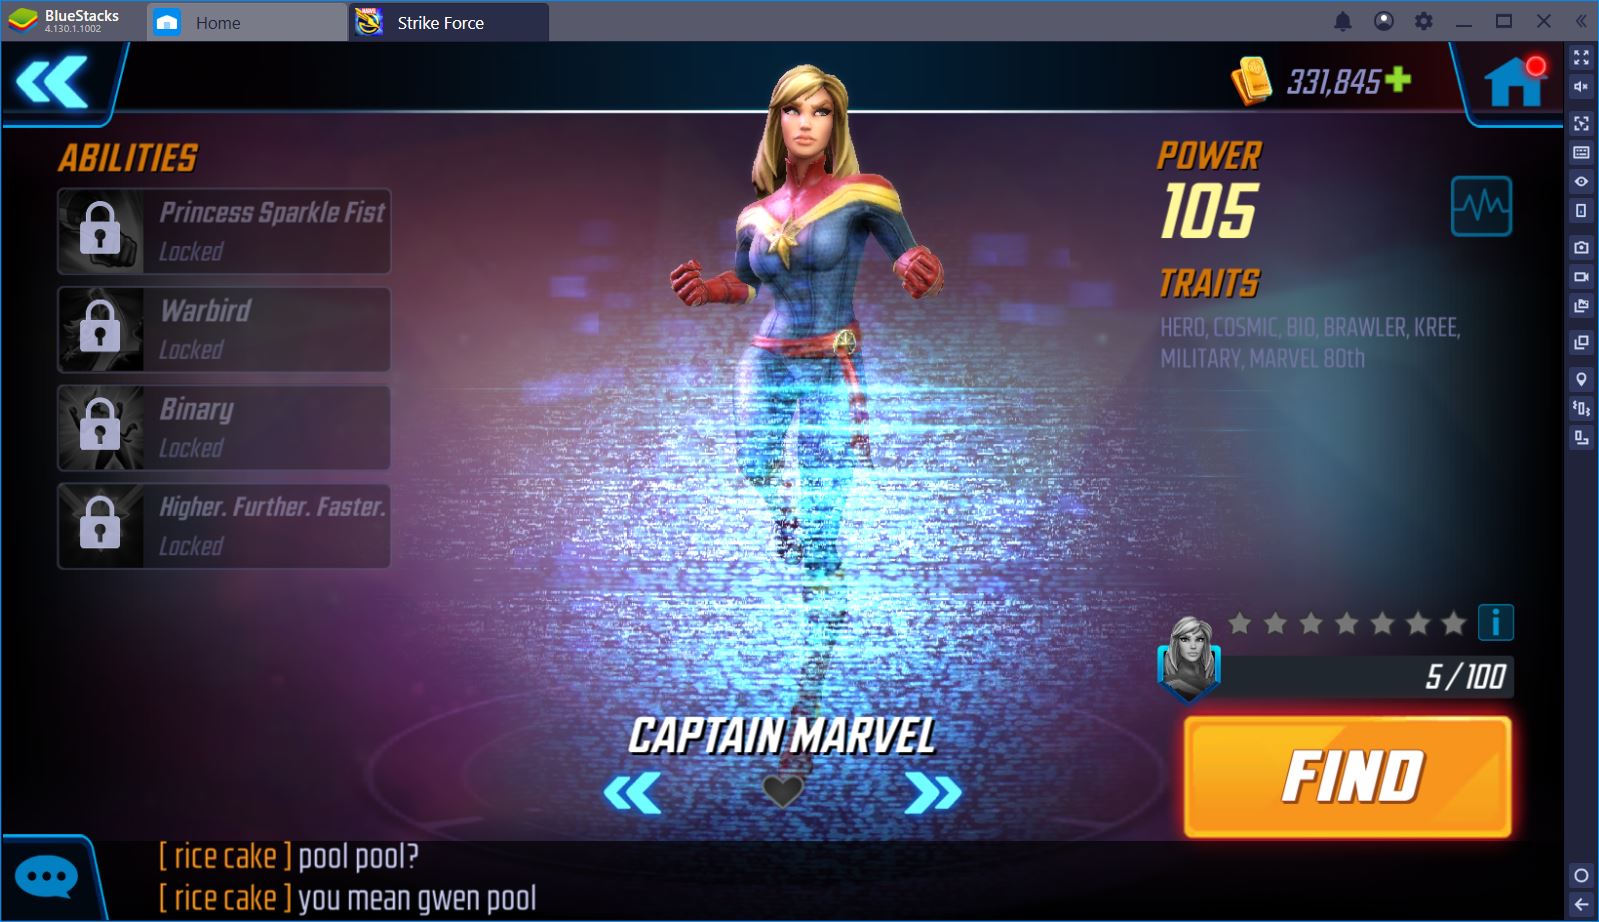 TOP 10 DIAMOND PROMOTION CHARACTERS TO UPGRADE - MARVEL Strike